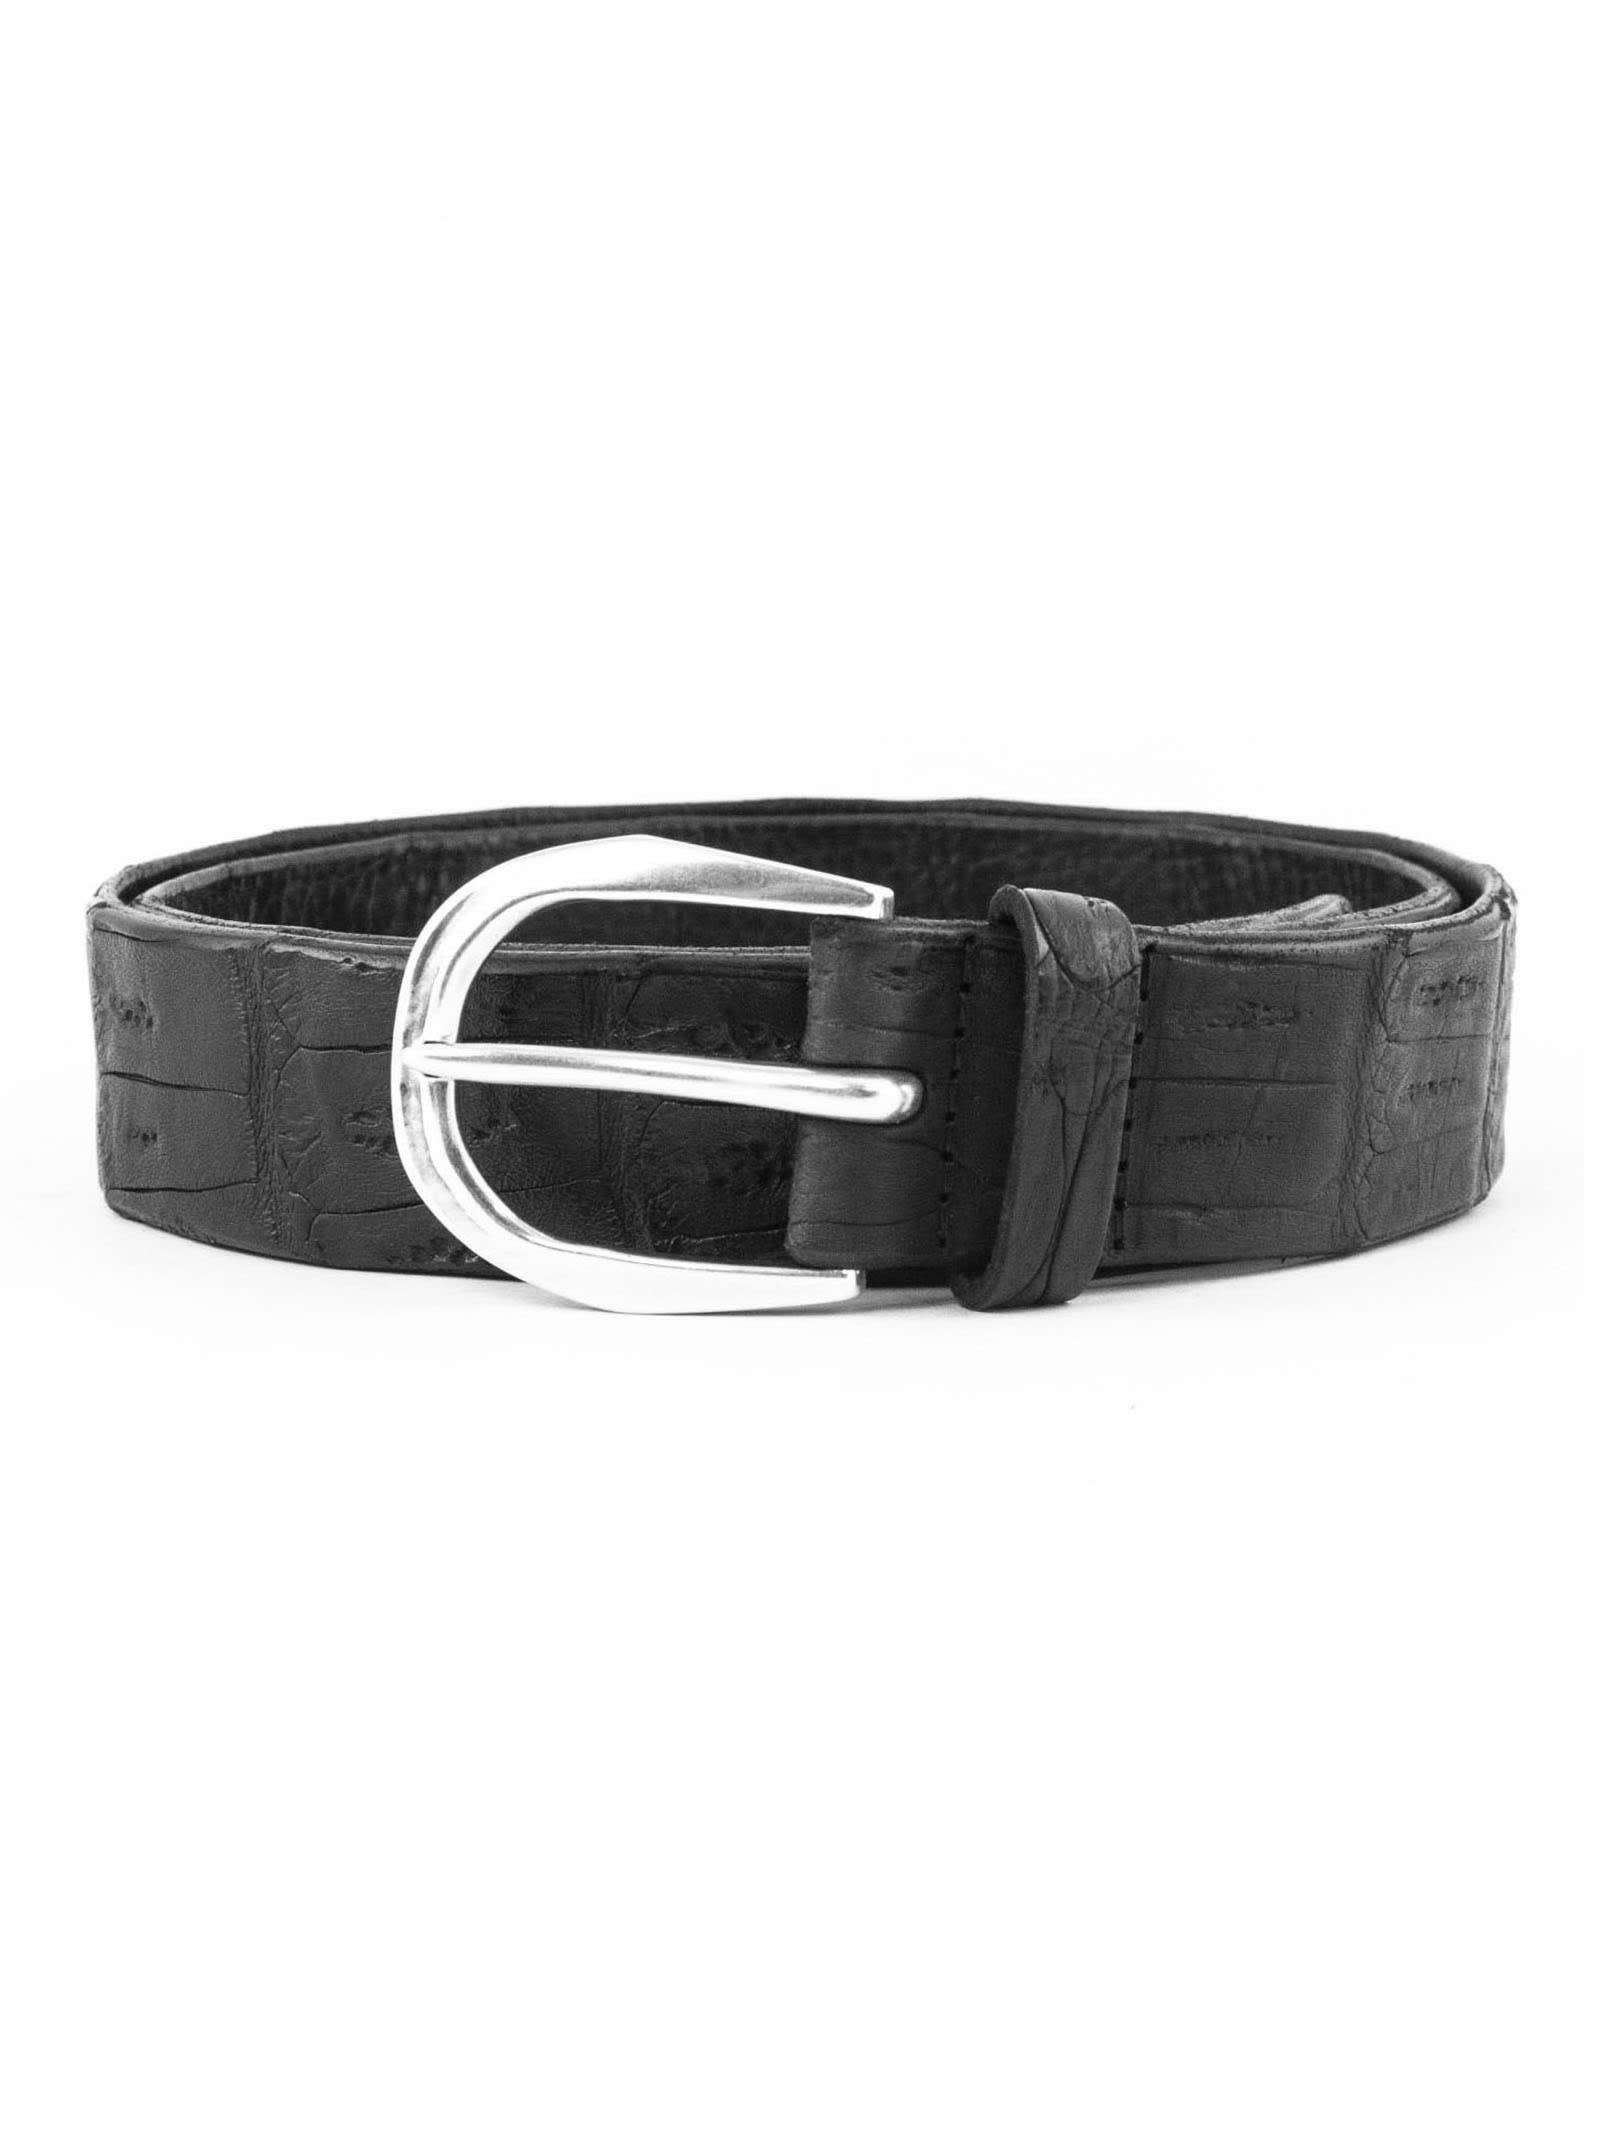 Orciani Black Classic Crocodile Leather Belt With English Silver Finish Buckle, H3,5cm